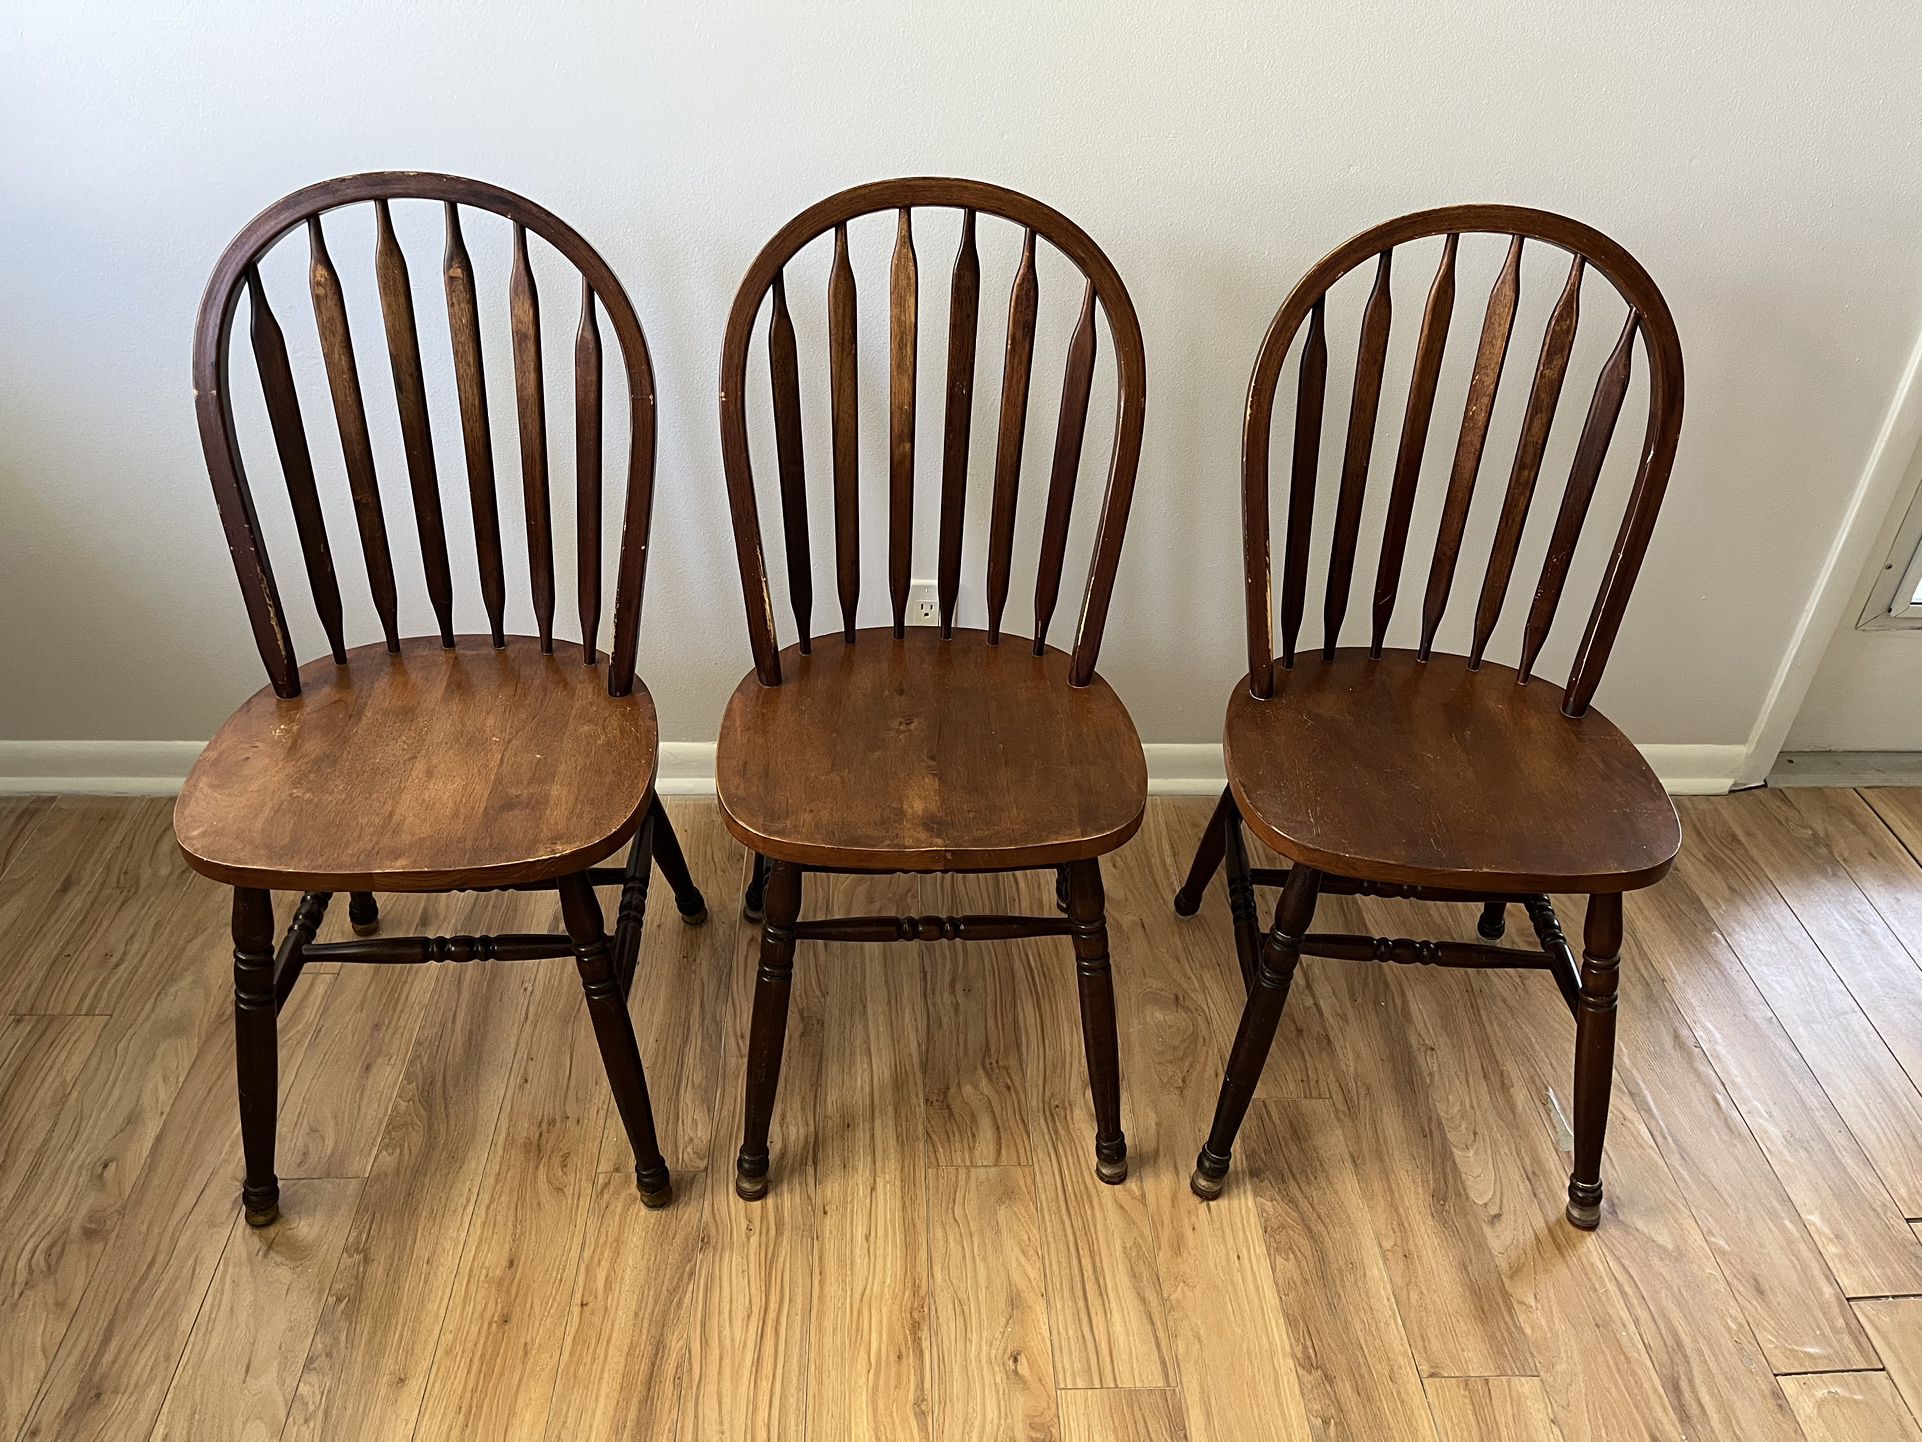 “3 “ Used Wooden Chairs